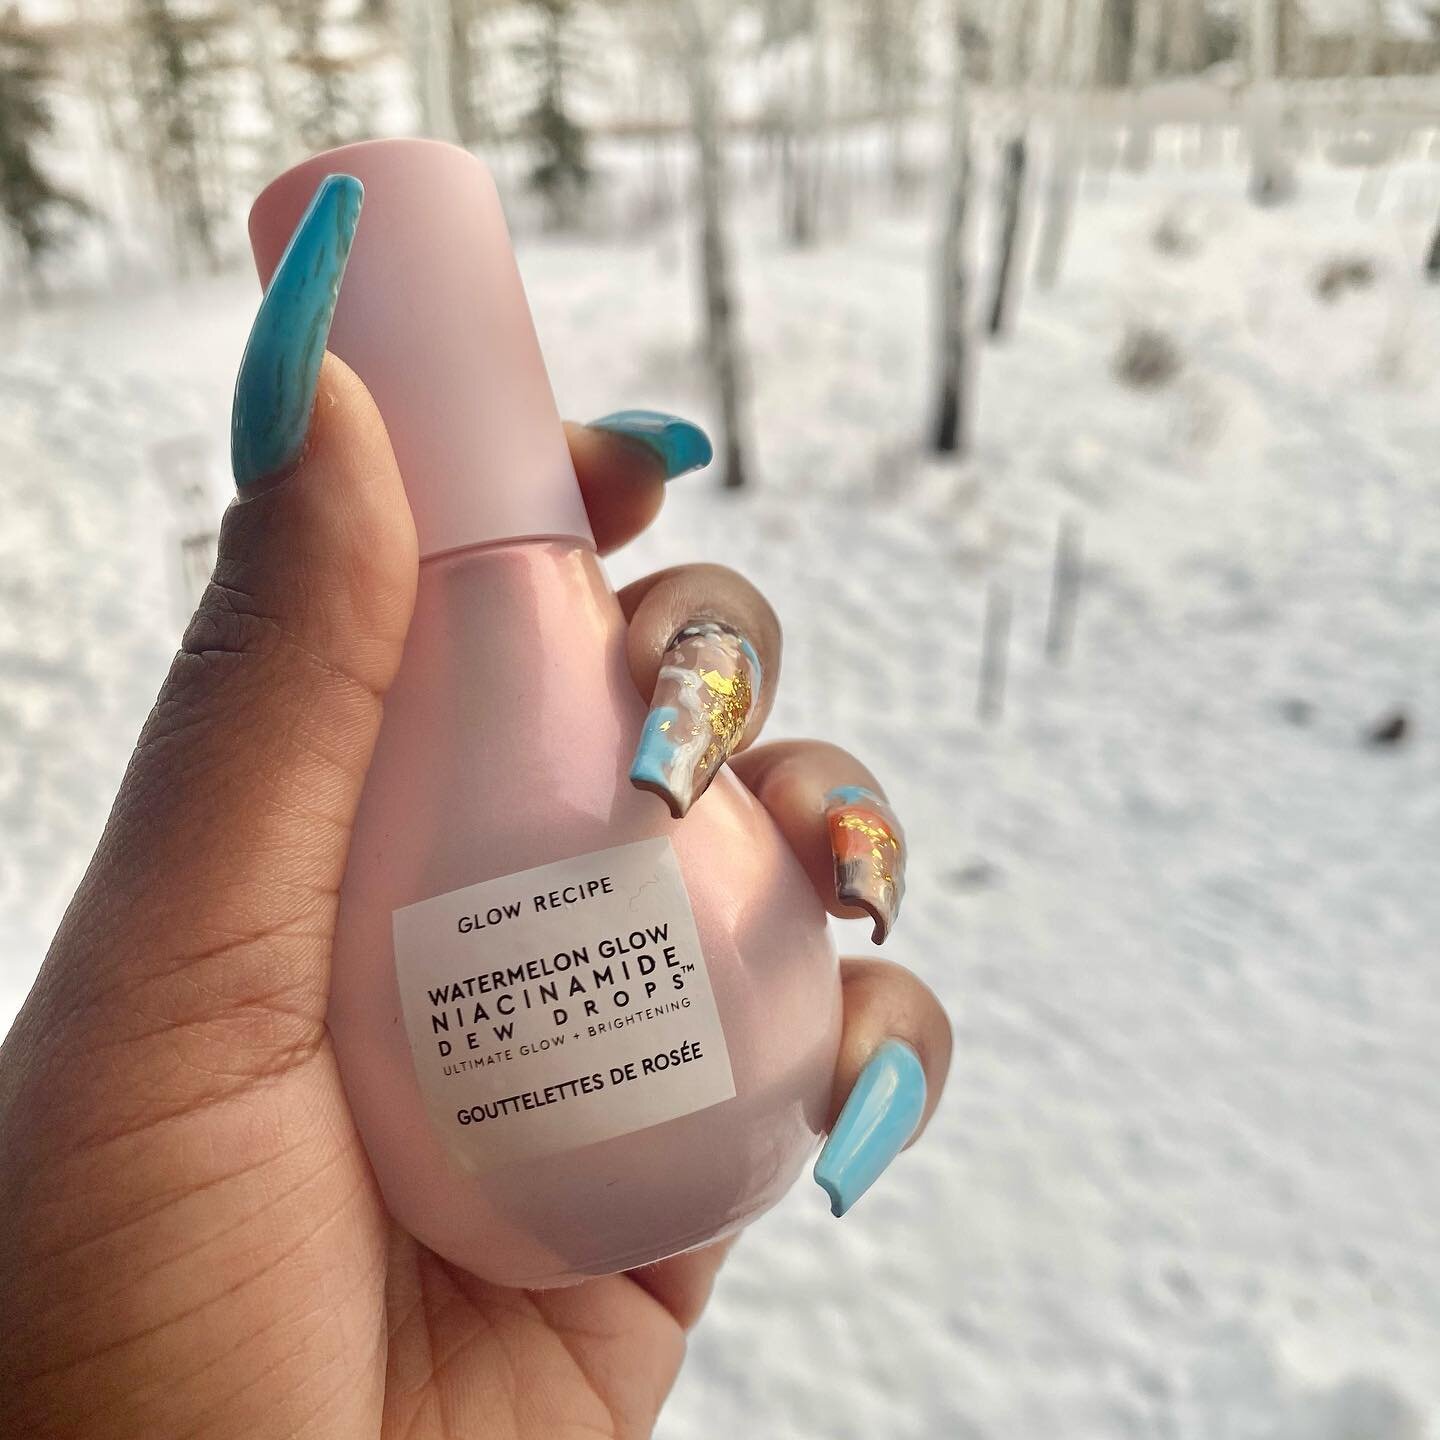 back to regularly scheduled programming 😂 &mdash; this @glowrecipe serum kept my skin glowing while in the mountains. My skin&rsquo;s dryness was real because of the cold and altitude, but the light texture and dewy finish of this product was easily